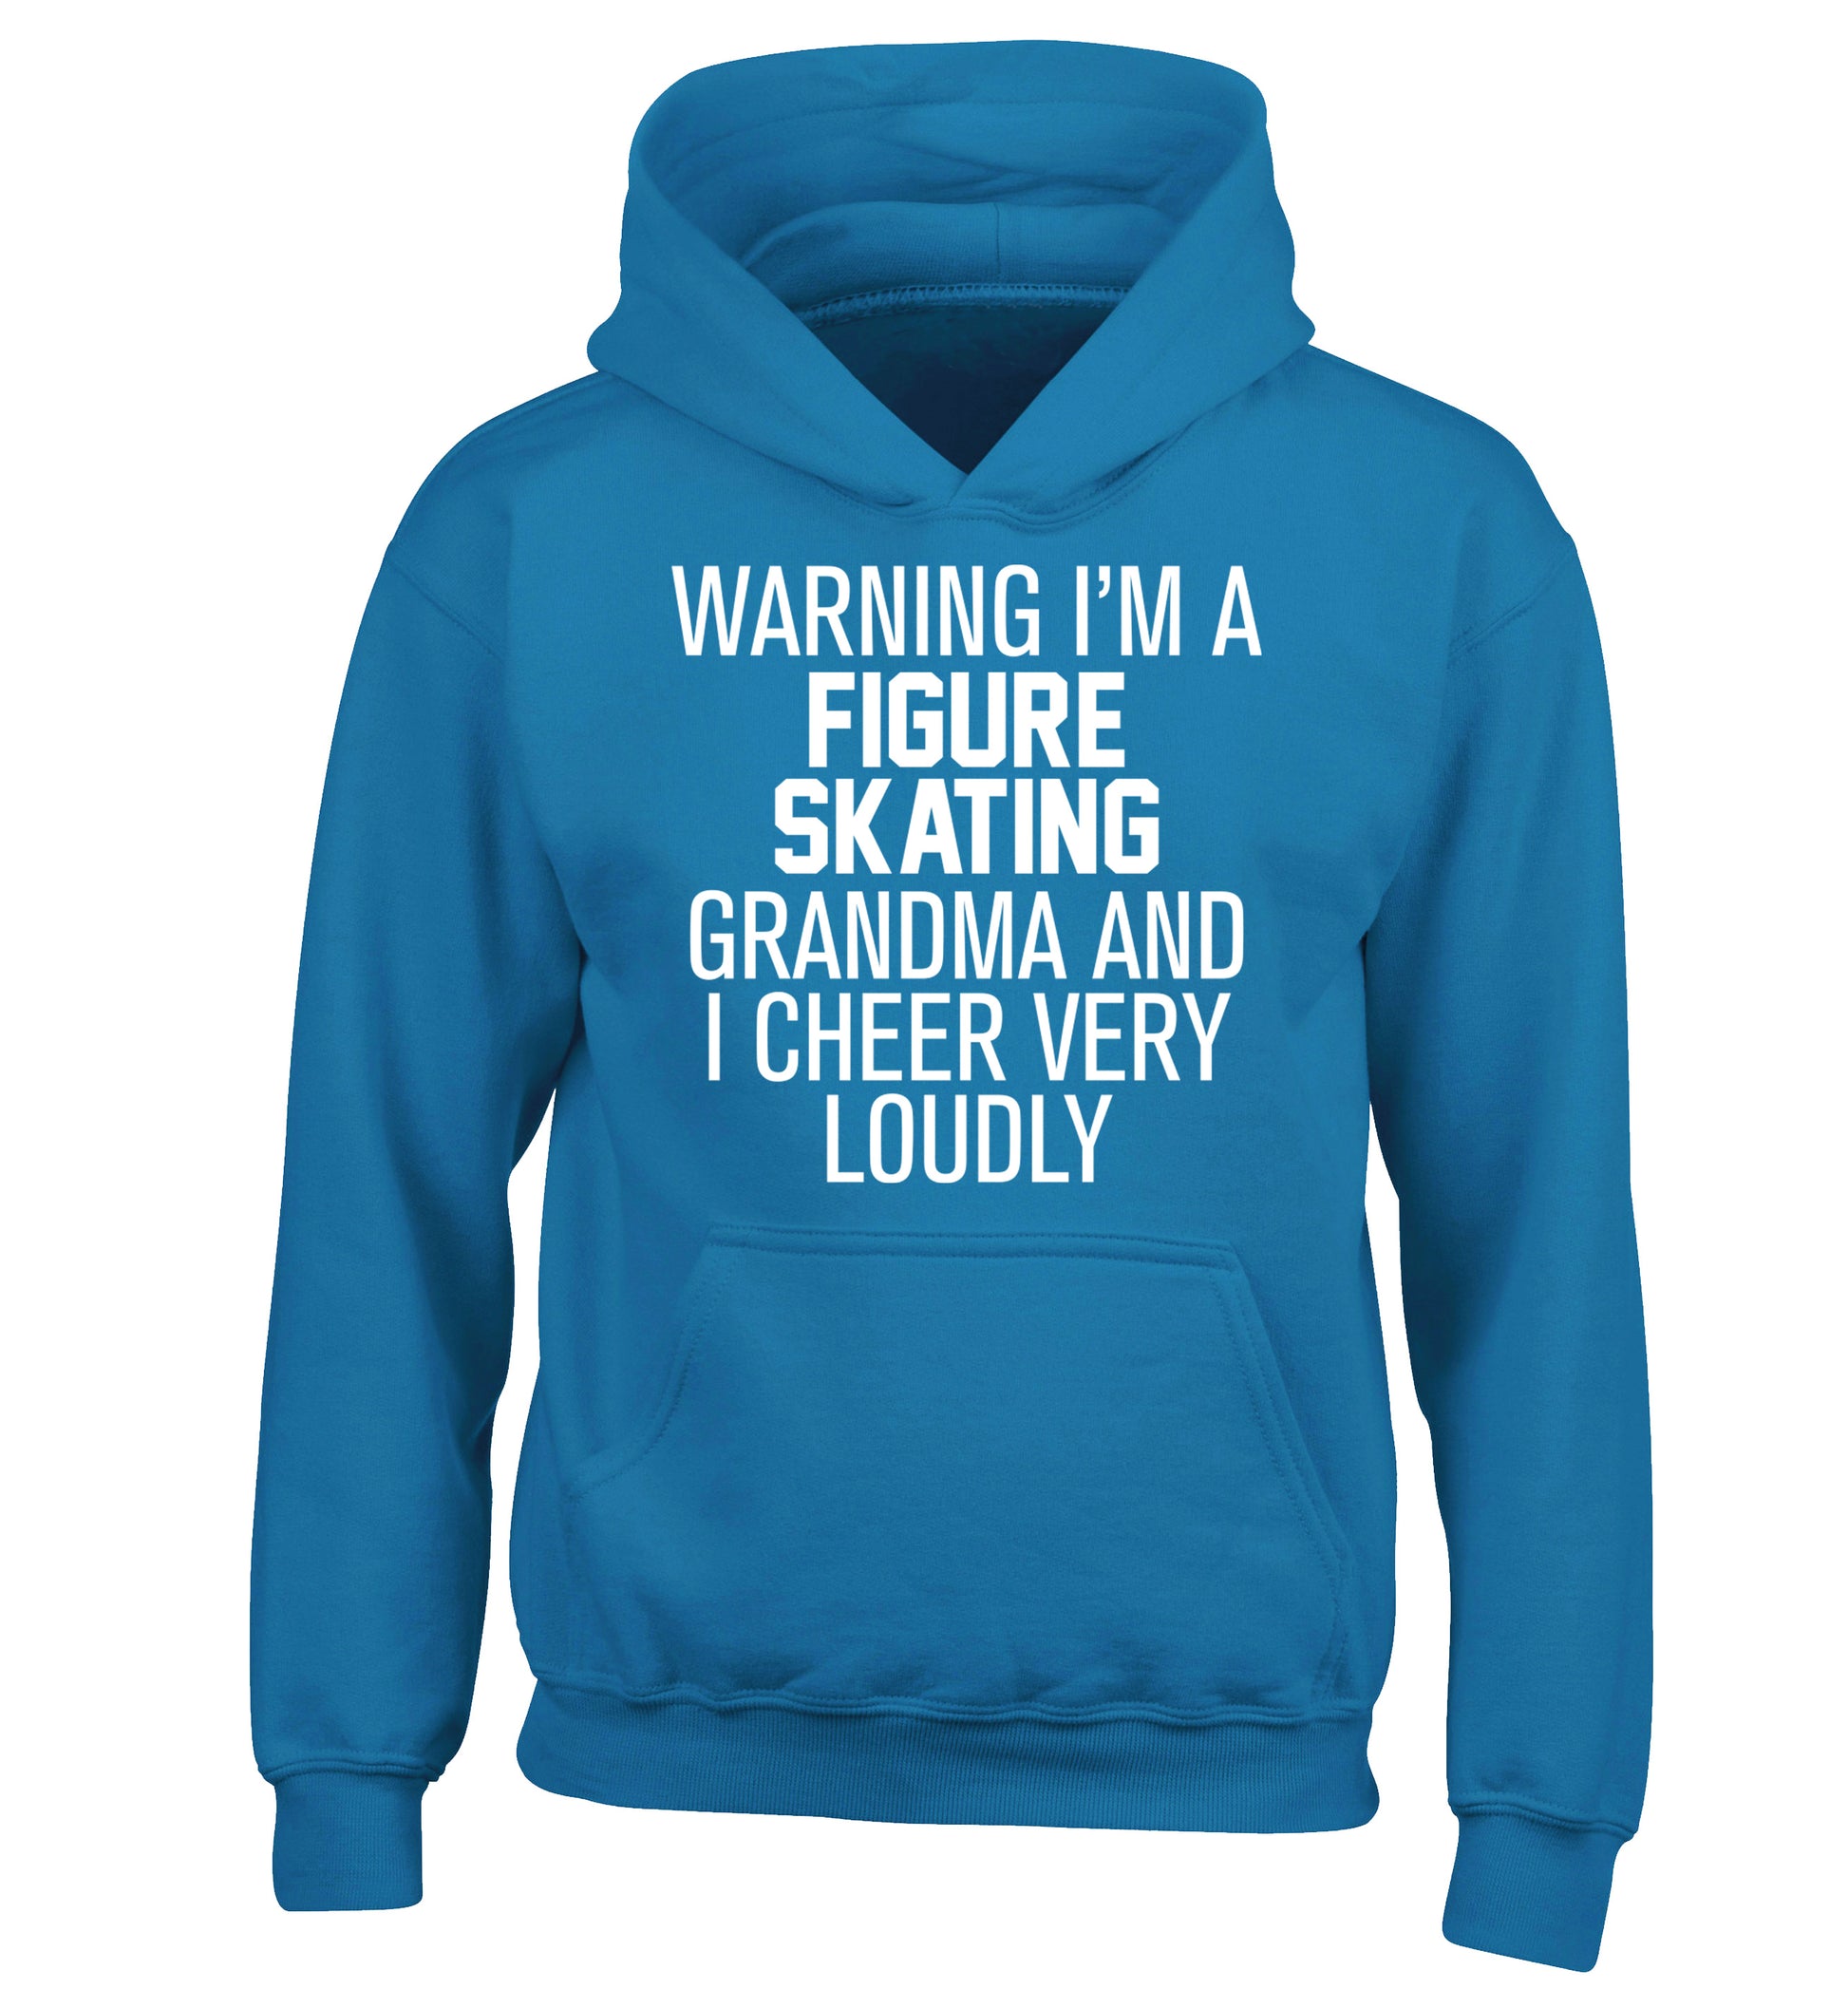 Warning I'm a figure skating grandma and I cheer very loudly children's blue hoodie 12-14 Years